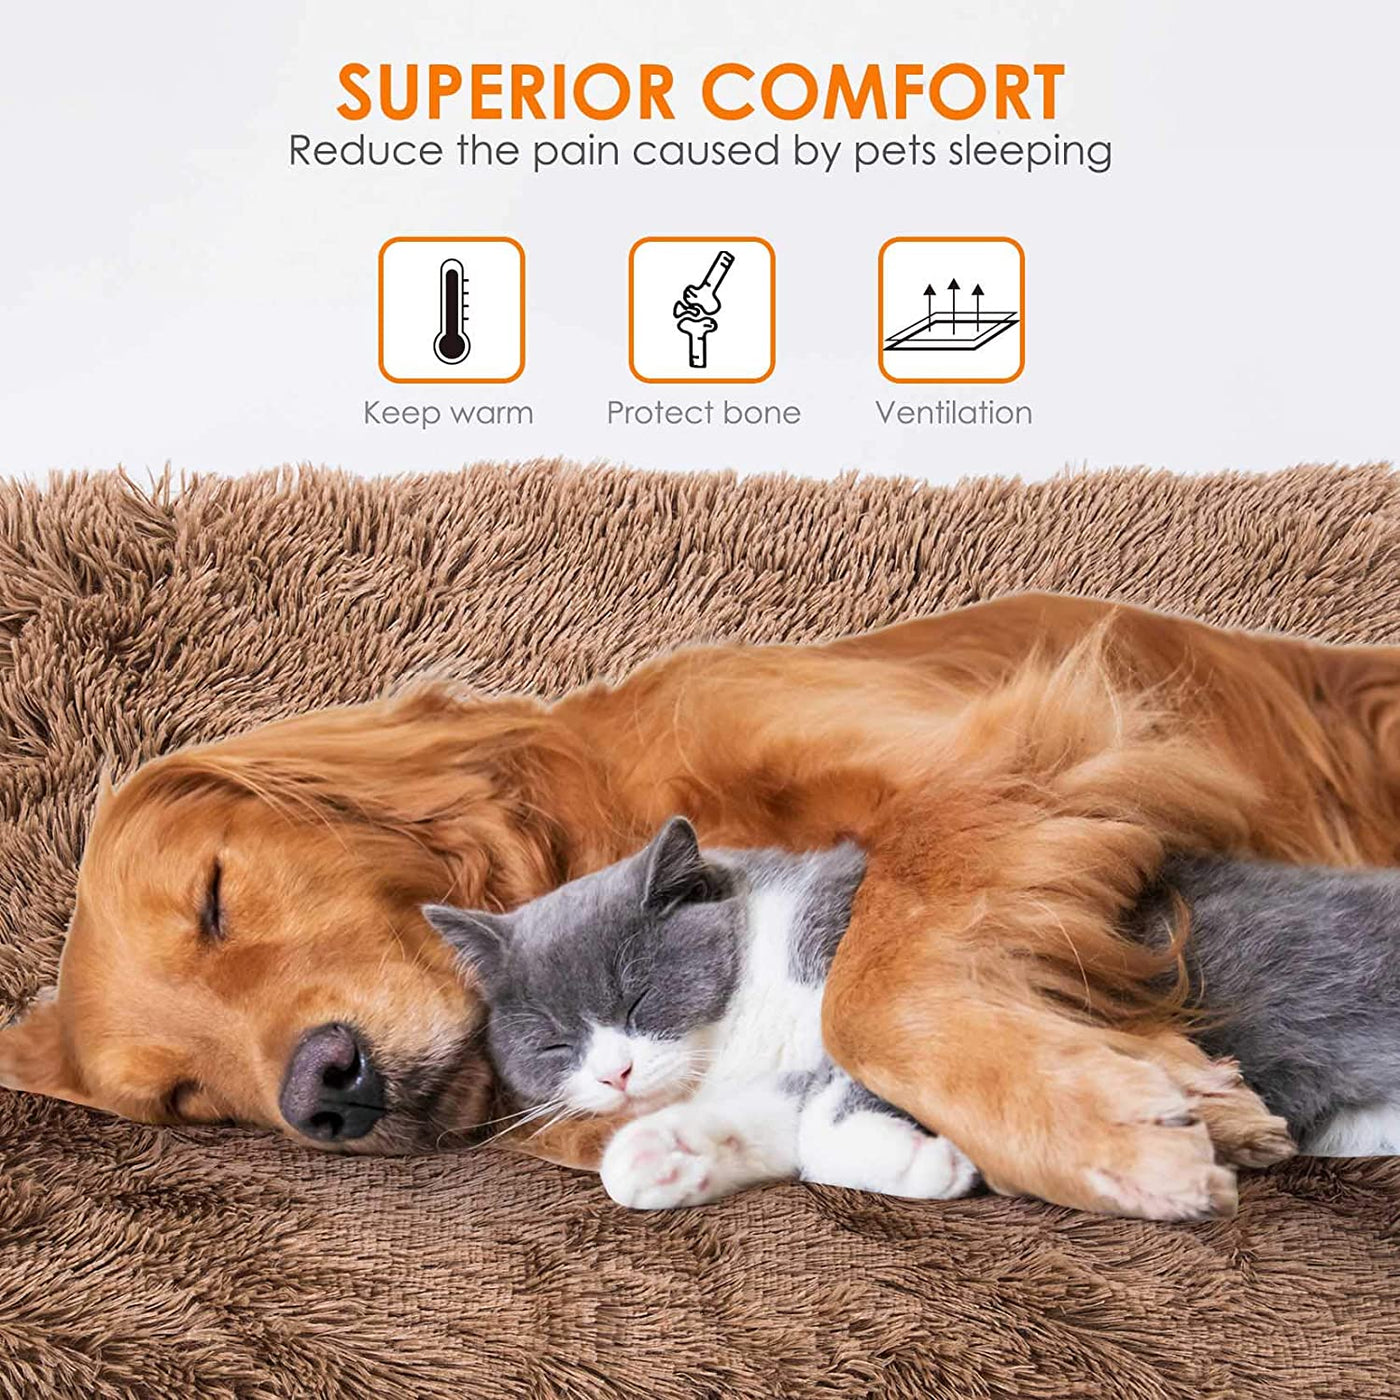 SOFISO Dog Bed Cat Bed Ultra Soft Plush Dog Crate Mat Pet Beds Mat for Cage Sofa Car Anti Slip Pet Cushion Self-Warming Dog Crate Bed Machine Washable(S-M-L)